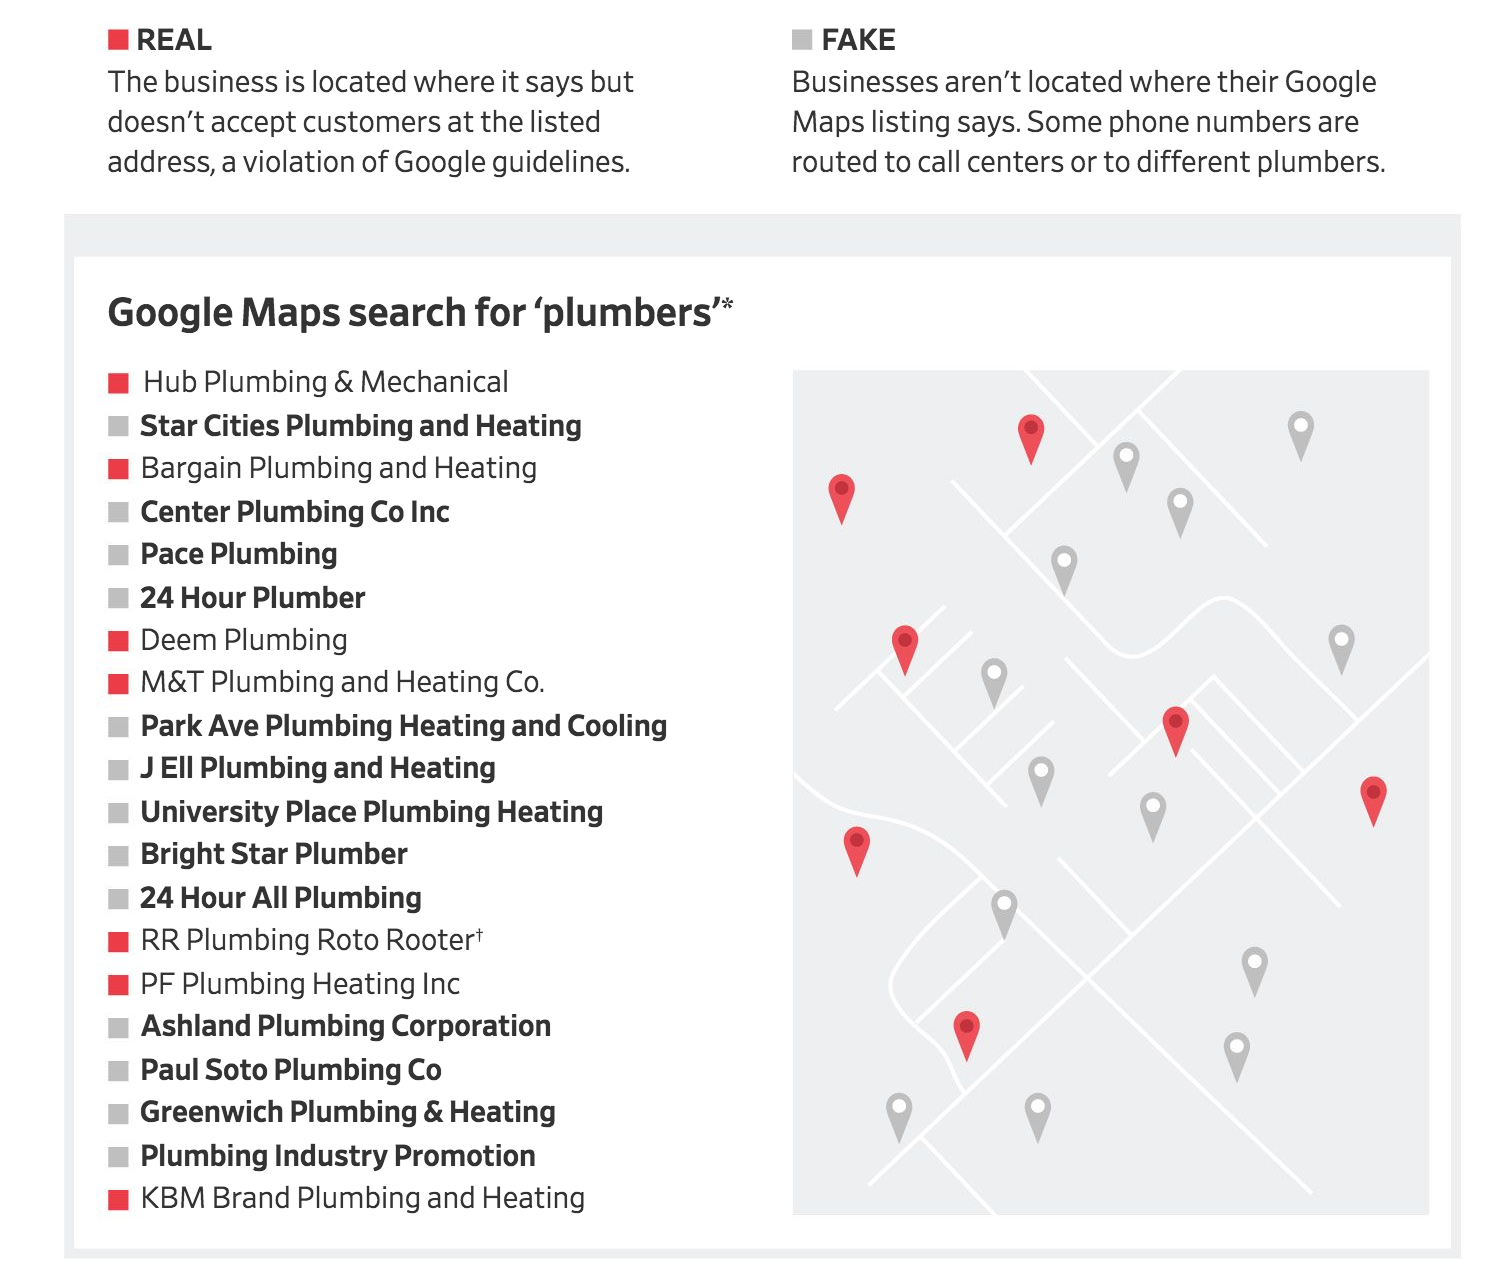 Millions Of Business Listings On Google Maps Are Fake—And Google Profits (#GotBitcoin?)